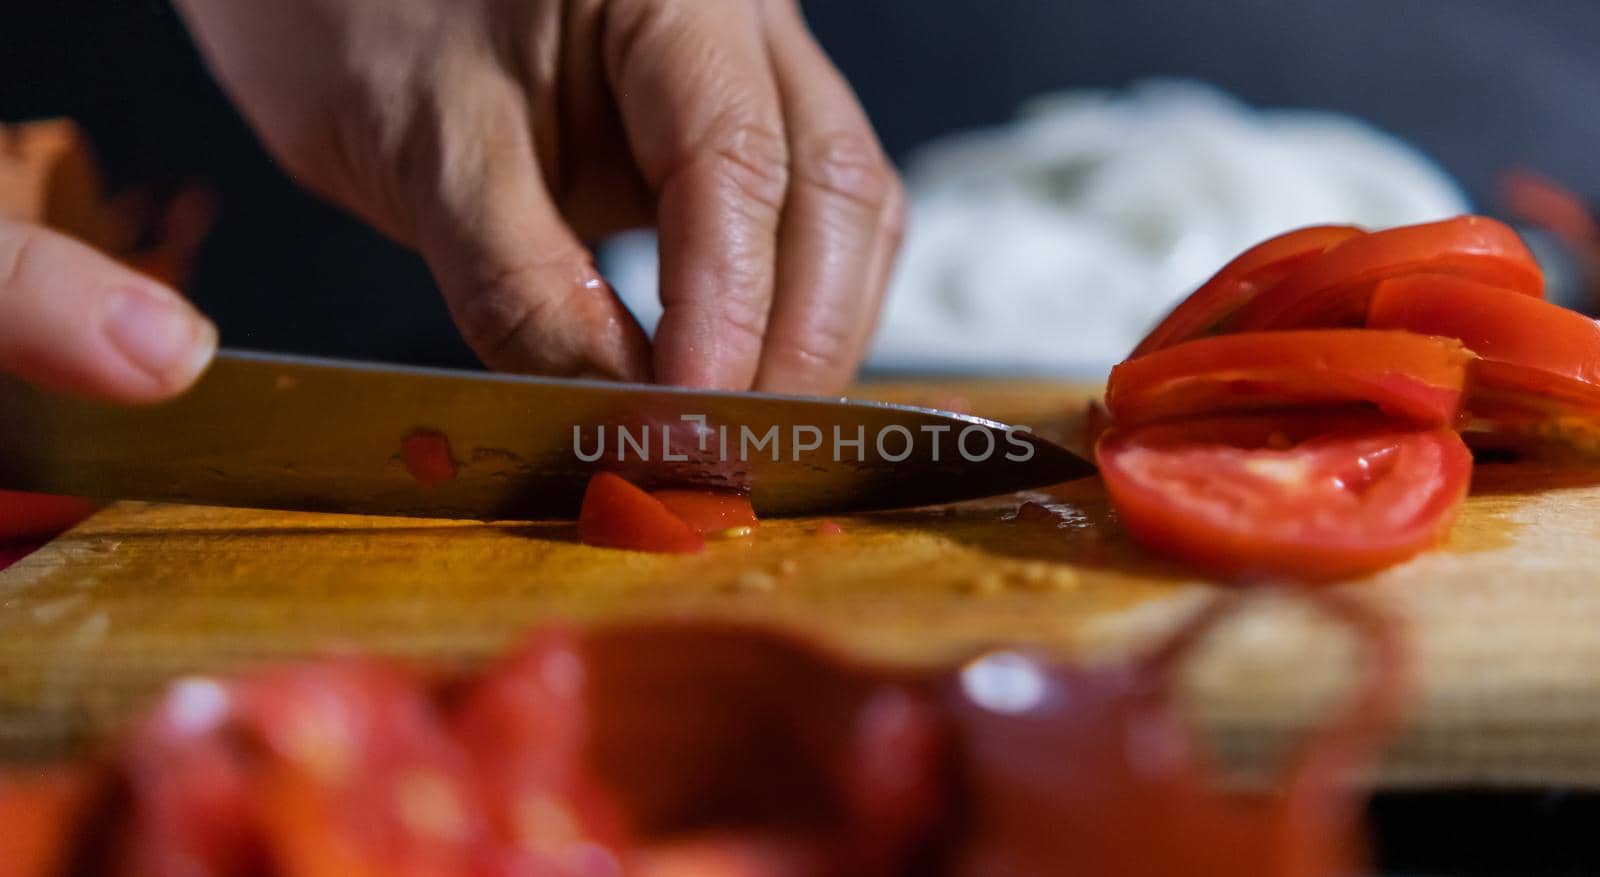 Hands slicing tomato on a wooden cutting board by Kanelbulle